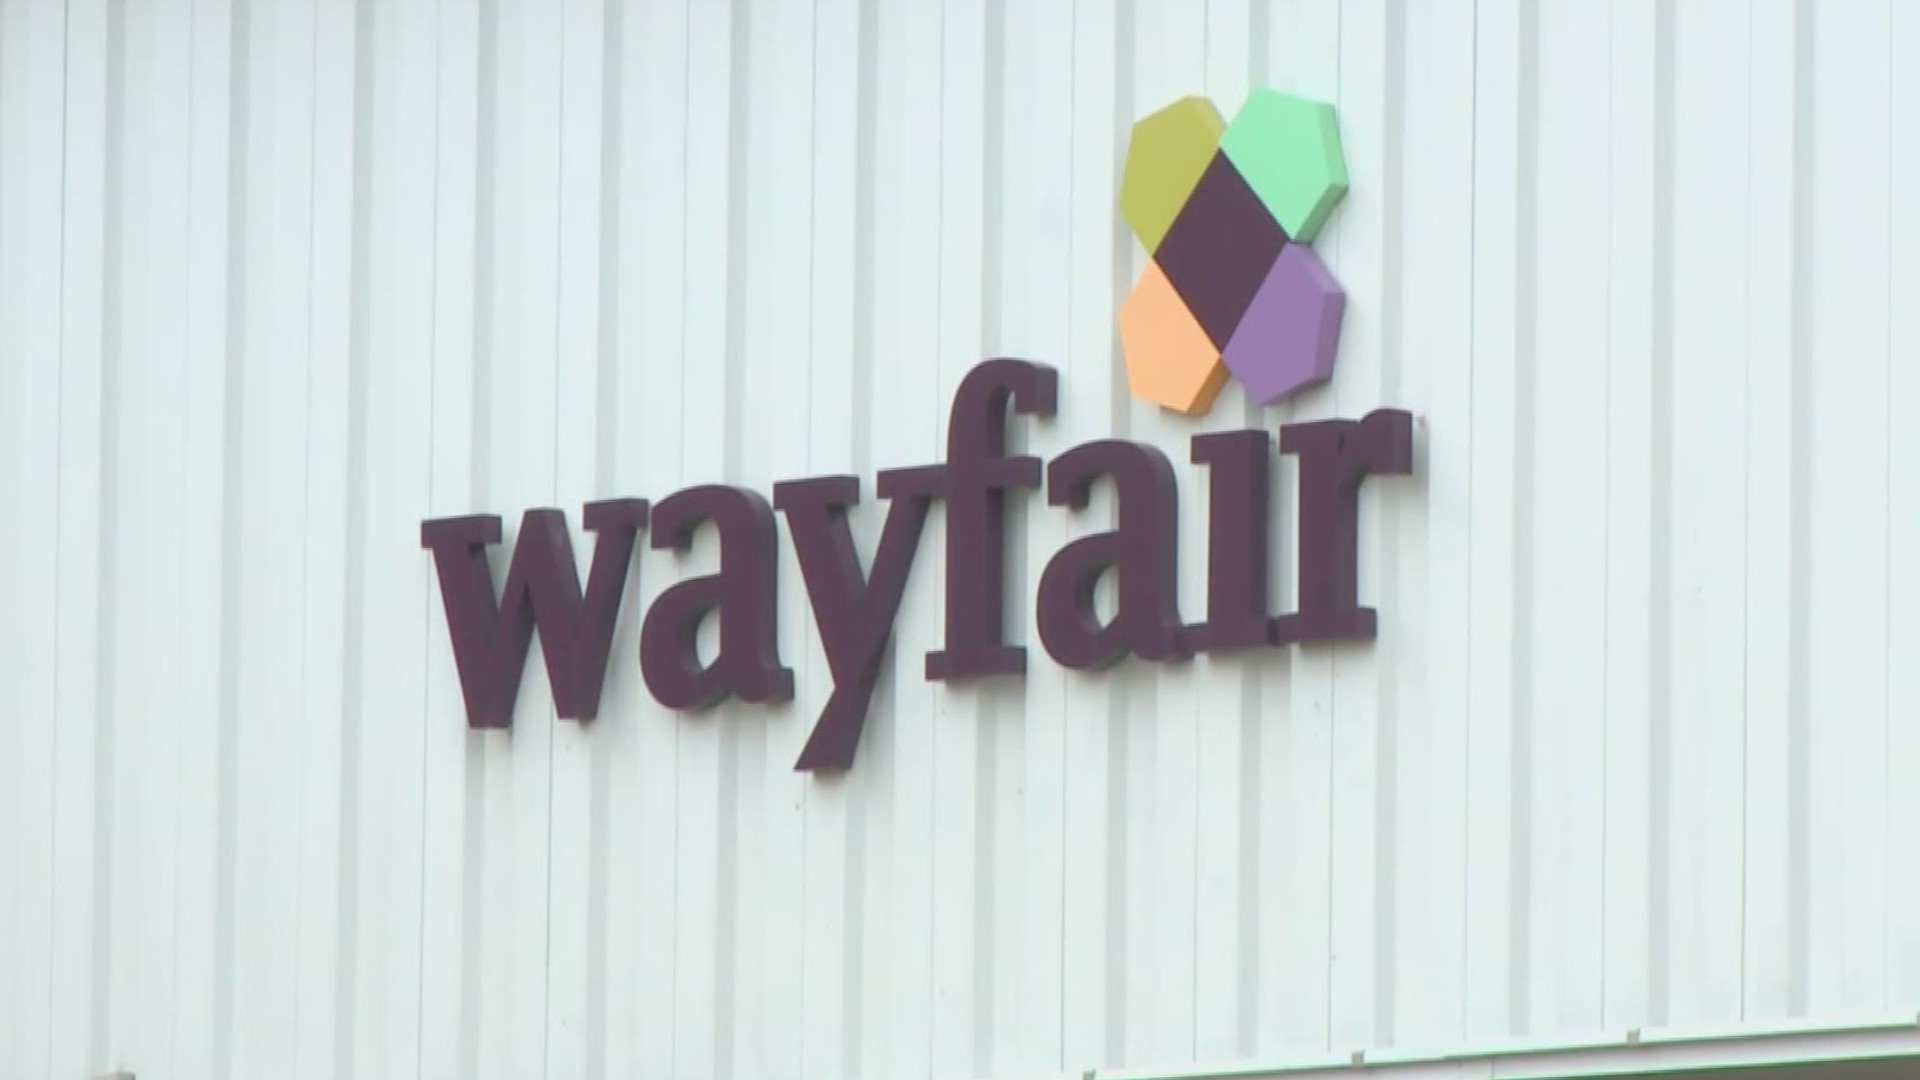 Wayfair gave notice on Thursday, February 13 that 55 employees would be laid off at their Brunwick facility effective immediately.